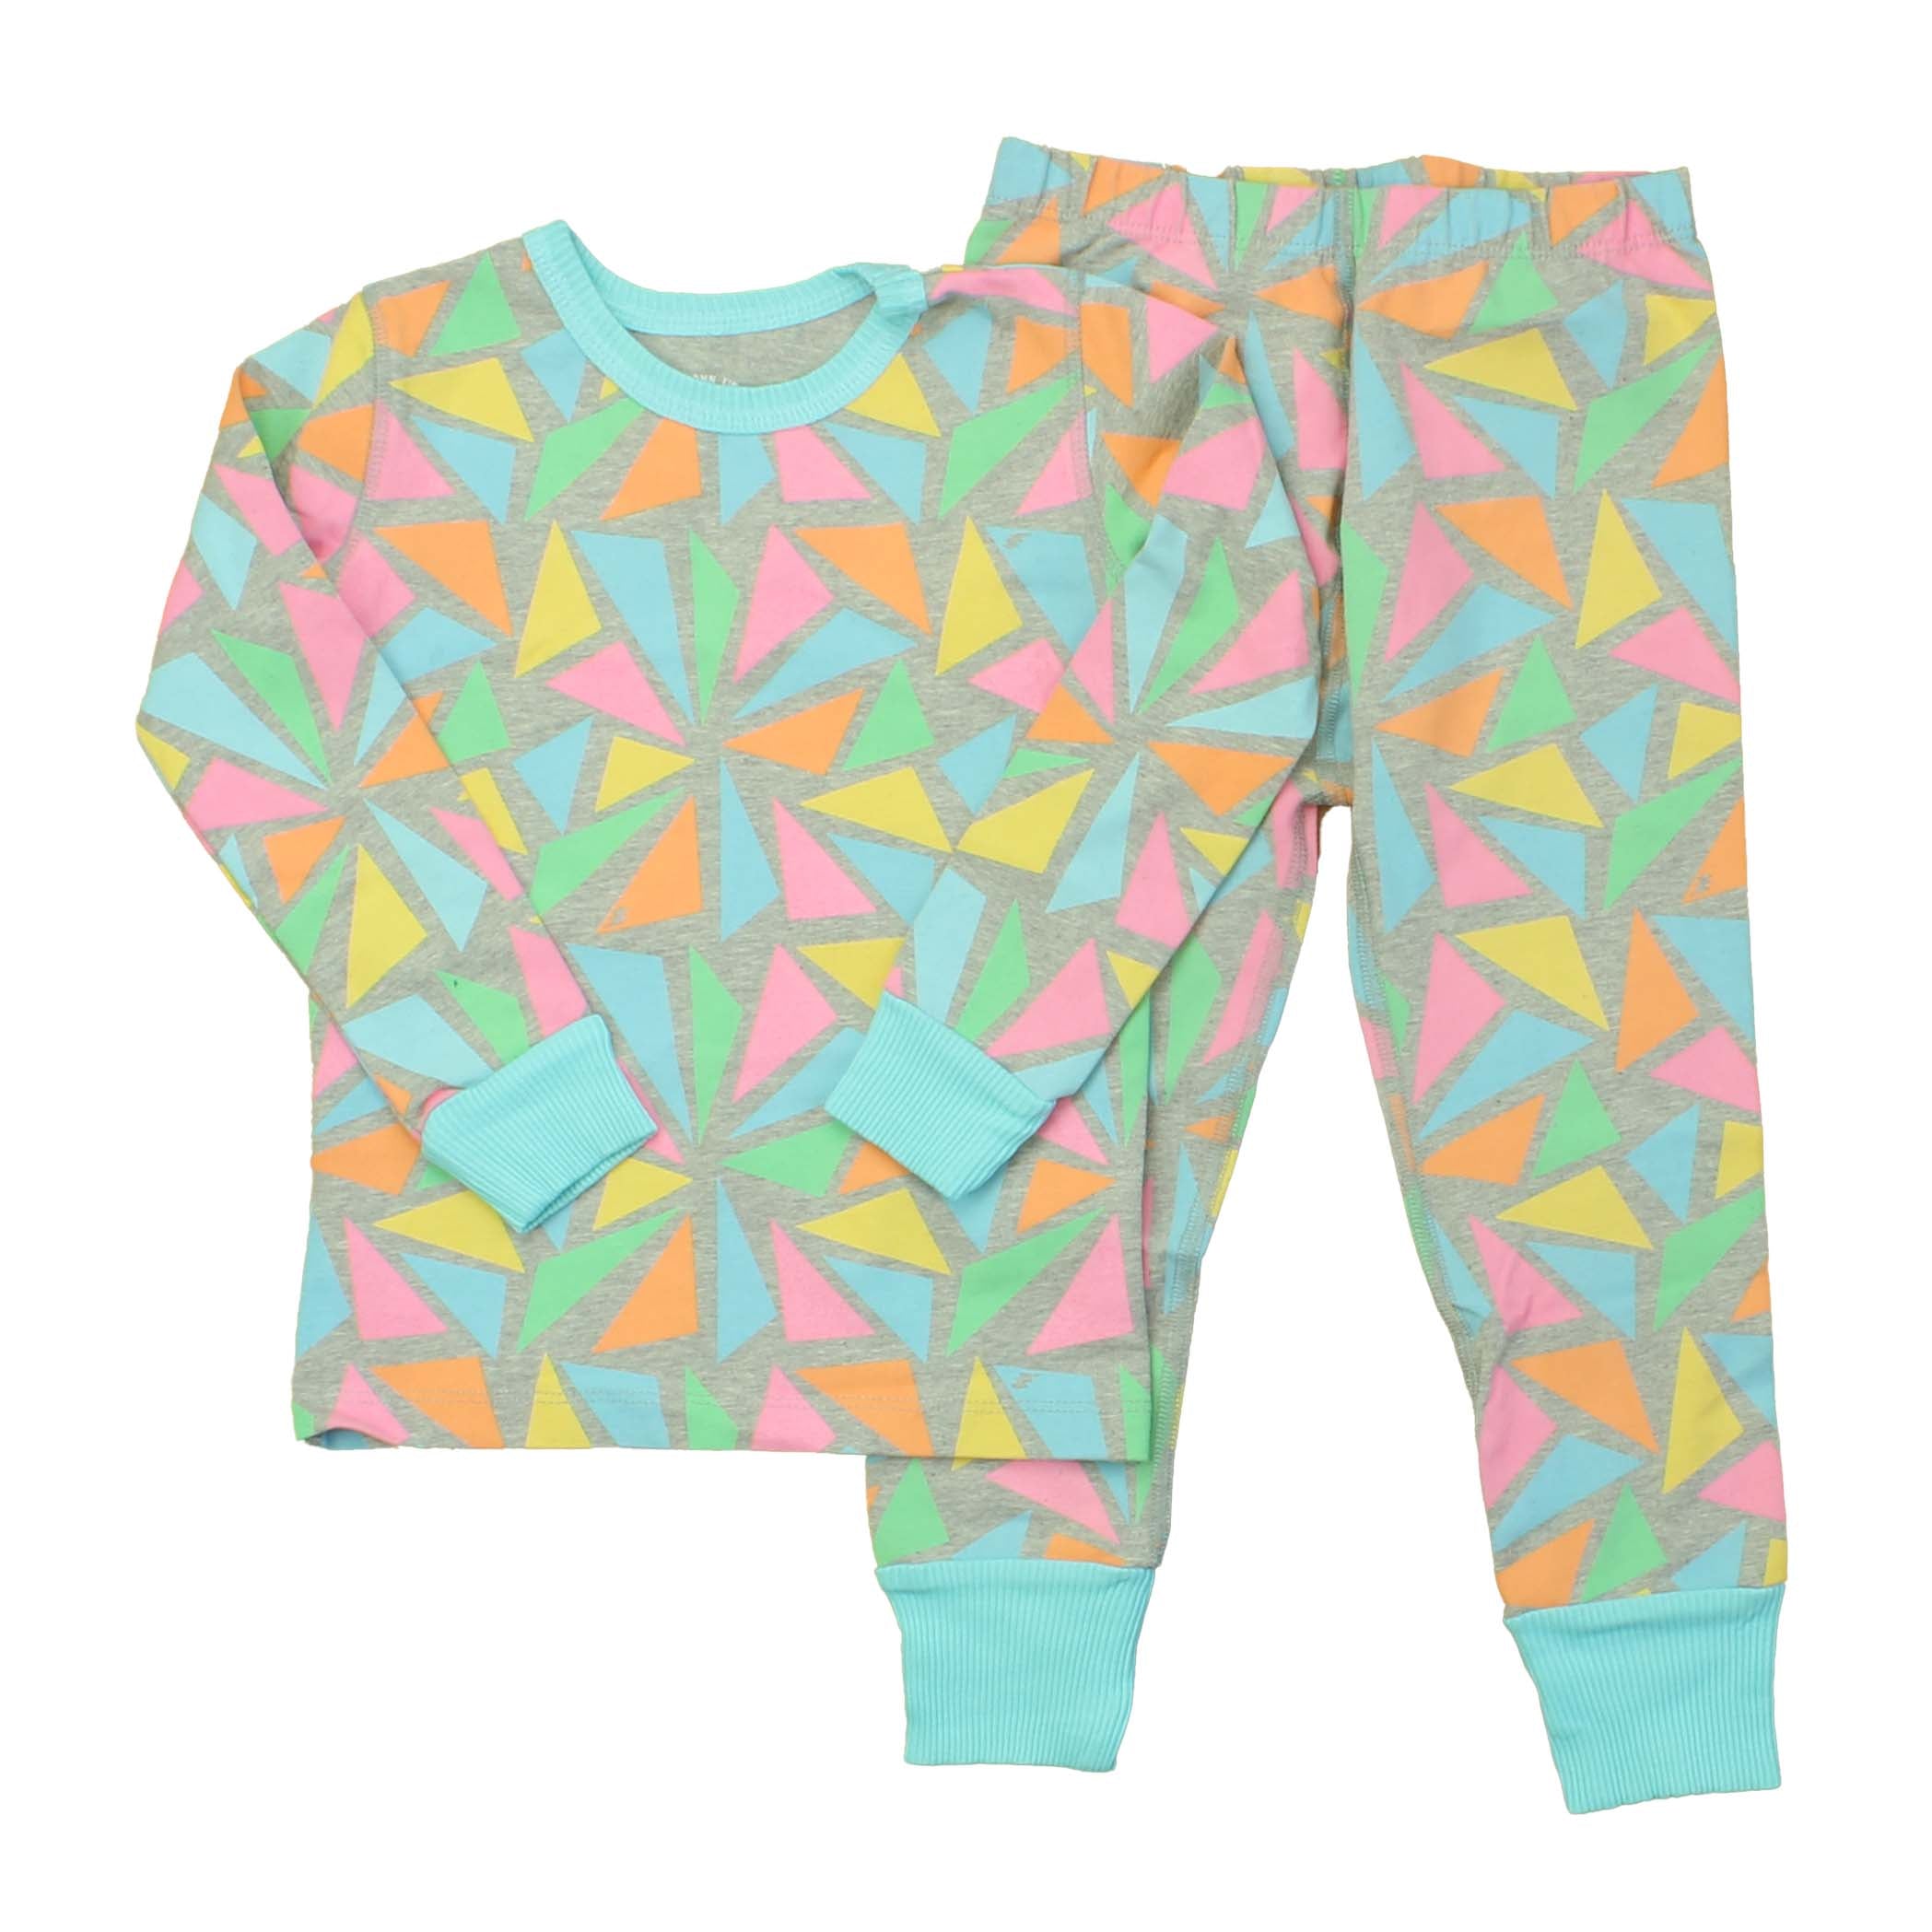 Pre-owned Grey | Multi | Triangles PJ Set size: 3T